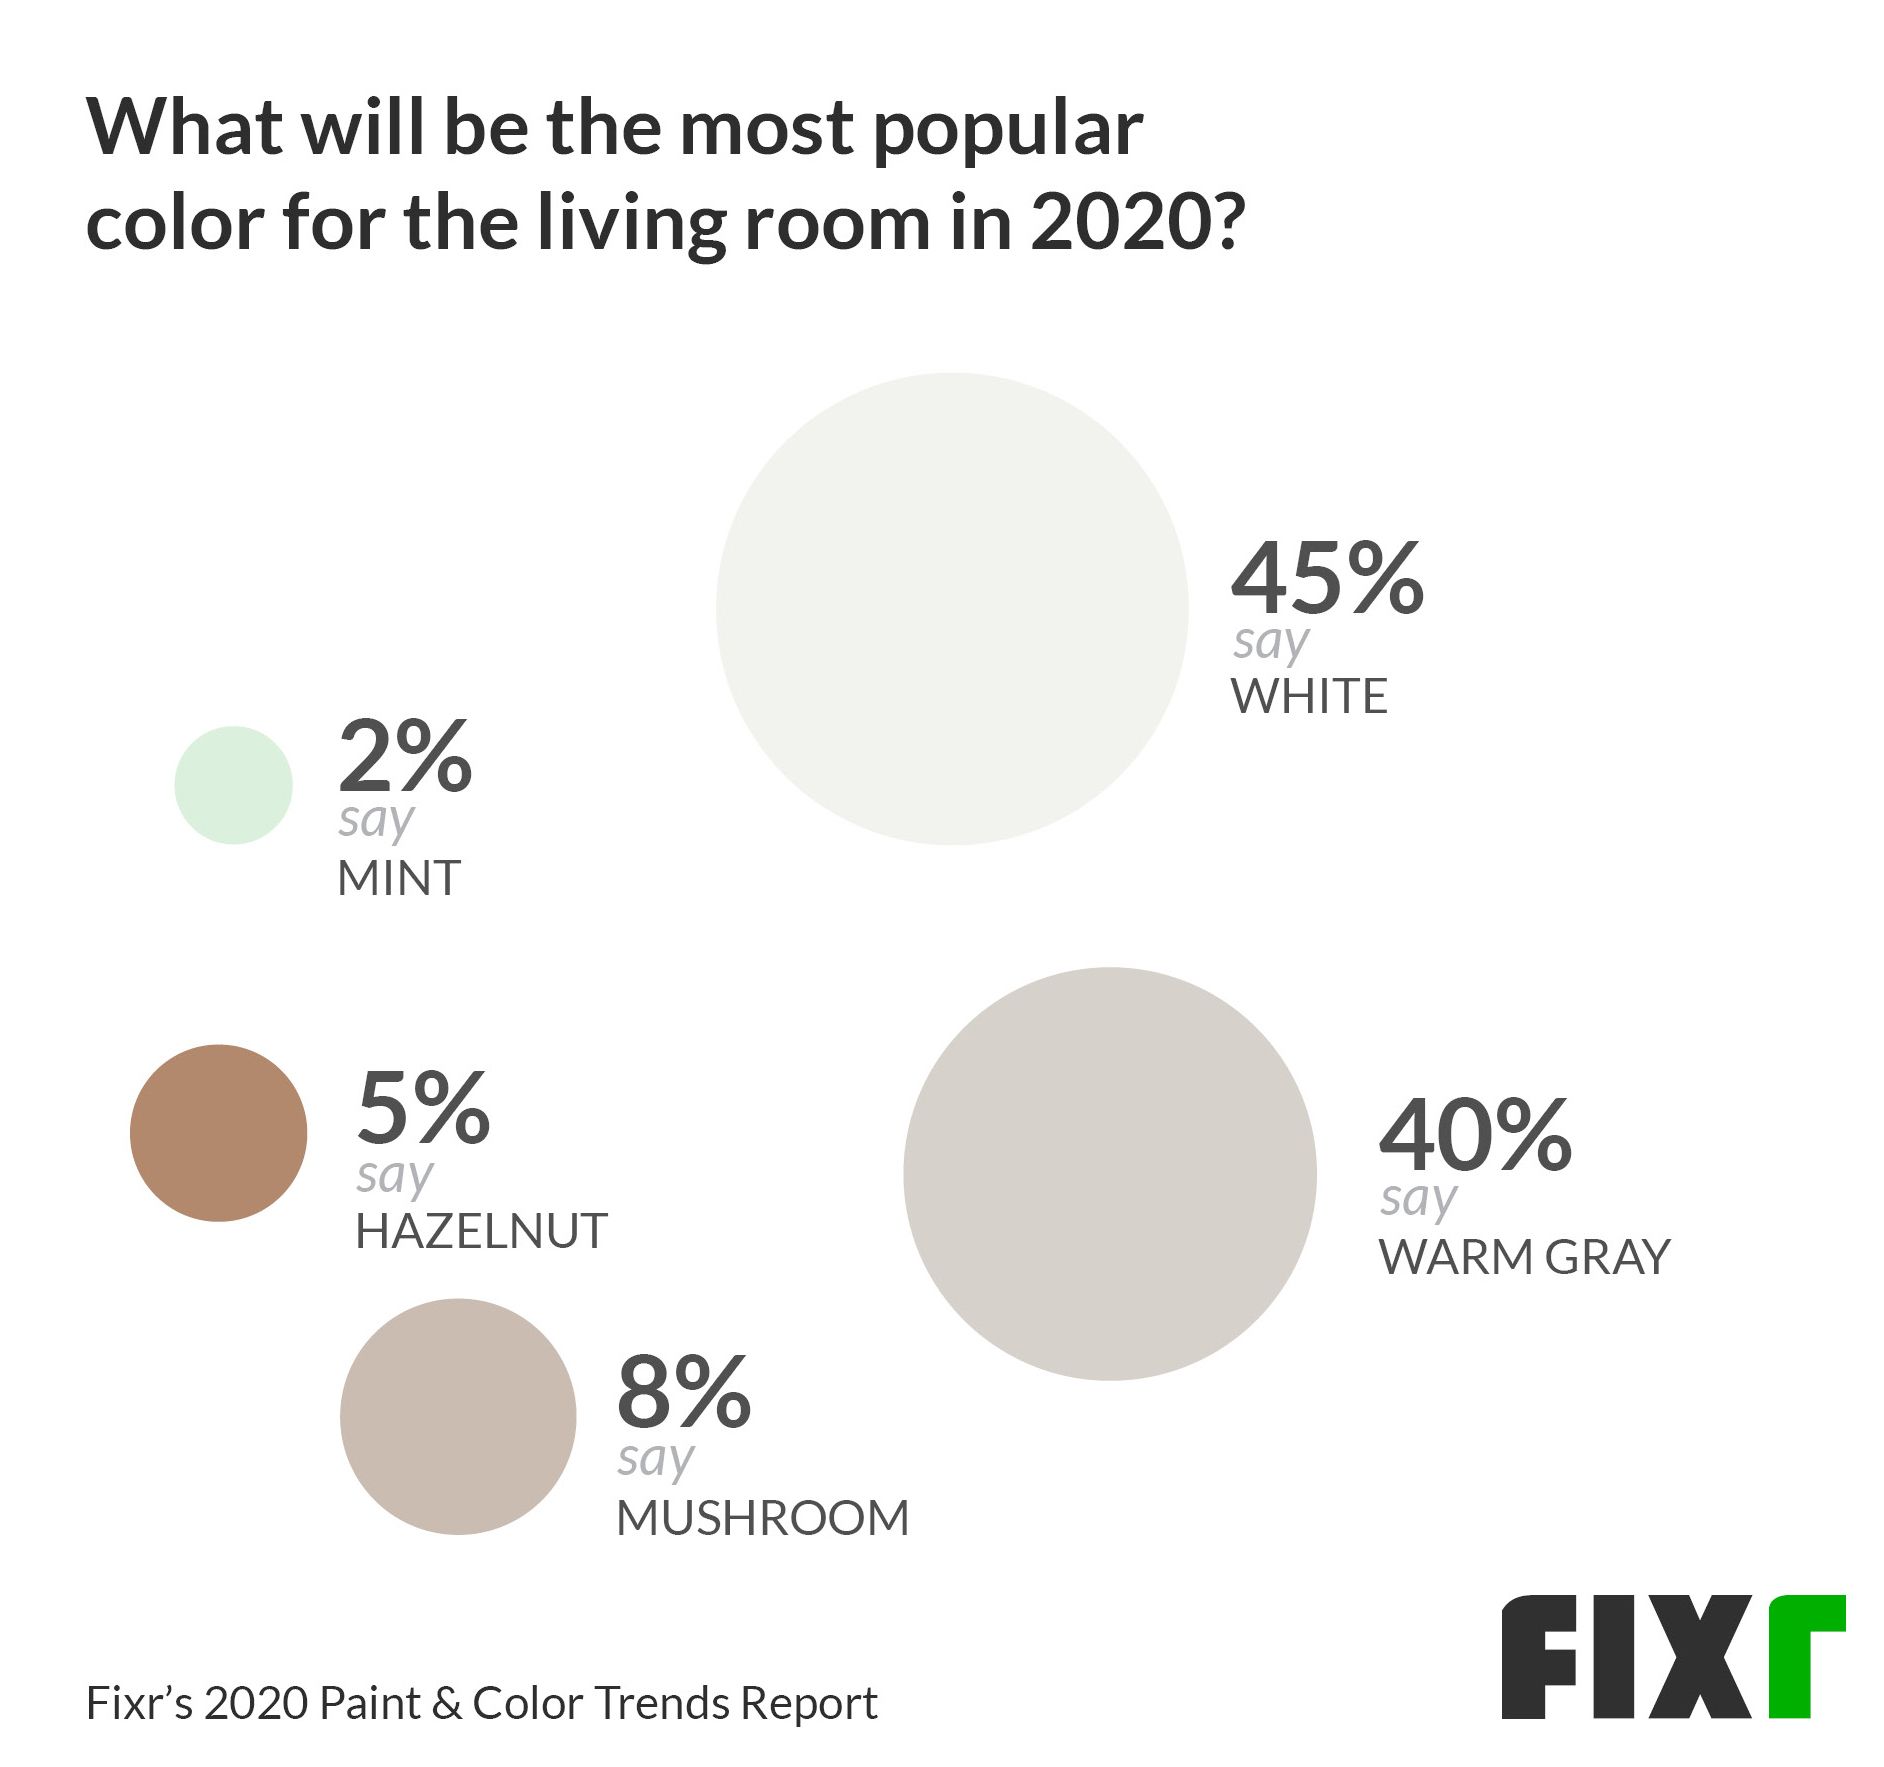 Paint And Color Trends 2020 Fixr, What Are The Most Popular Living Room Colors For 2020